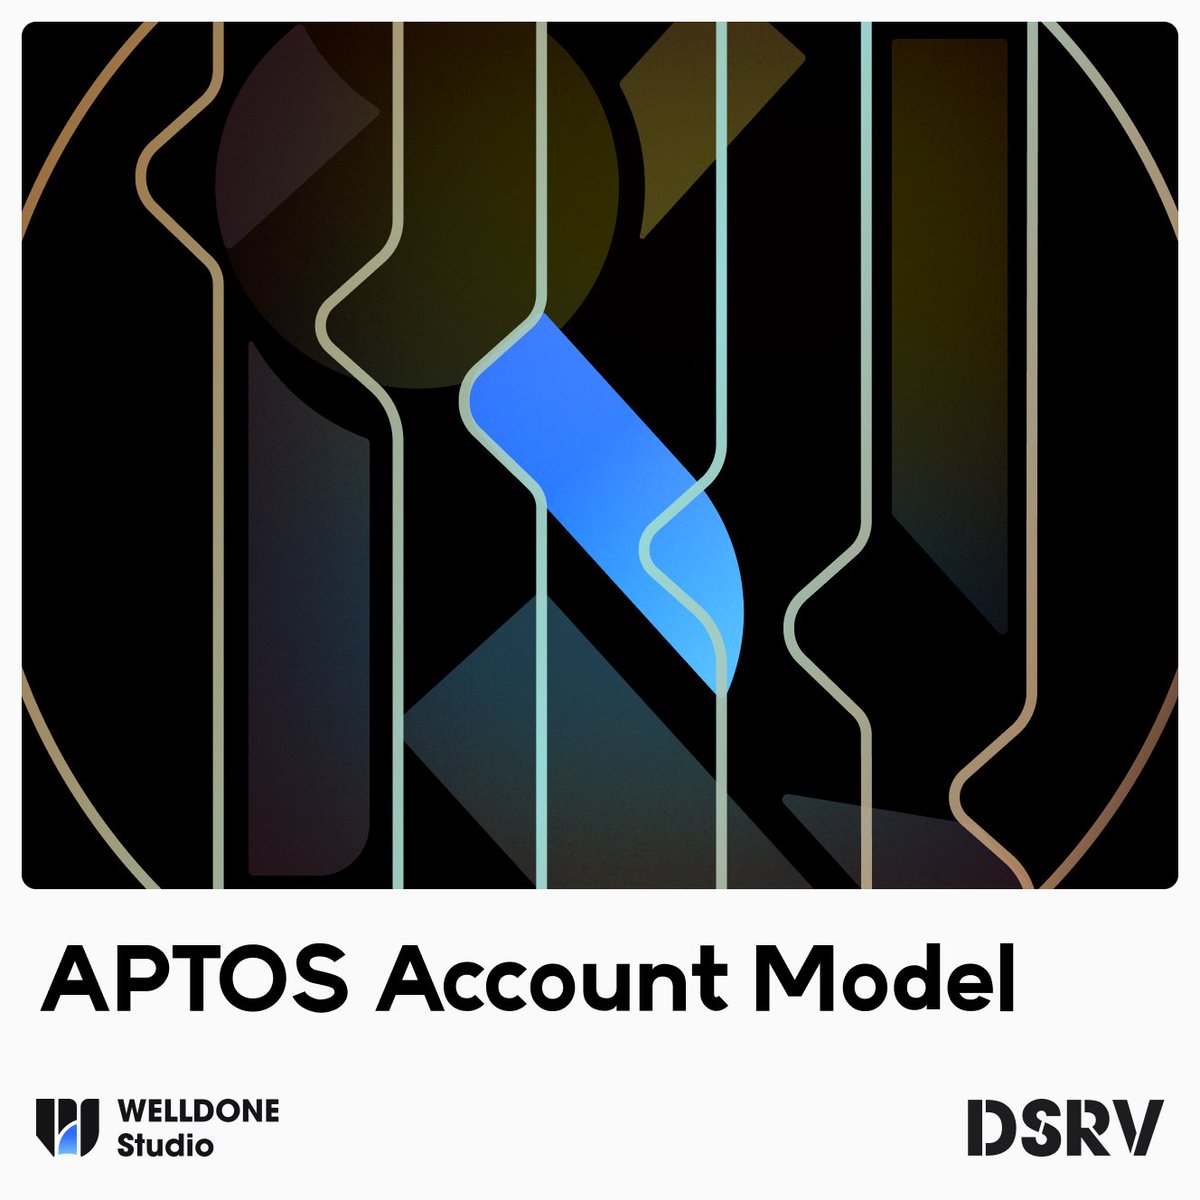 We have just unveiled an article on the Aptos Account Model